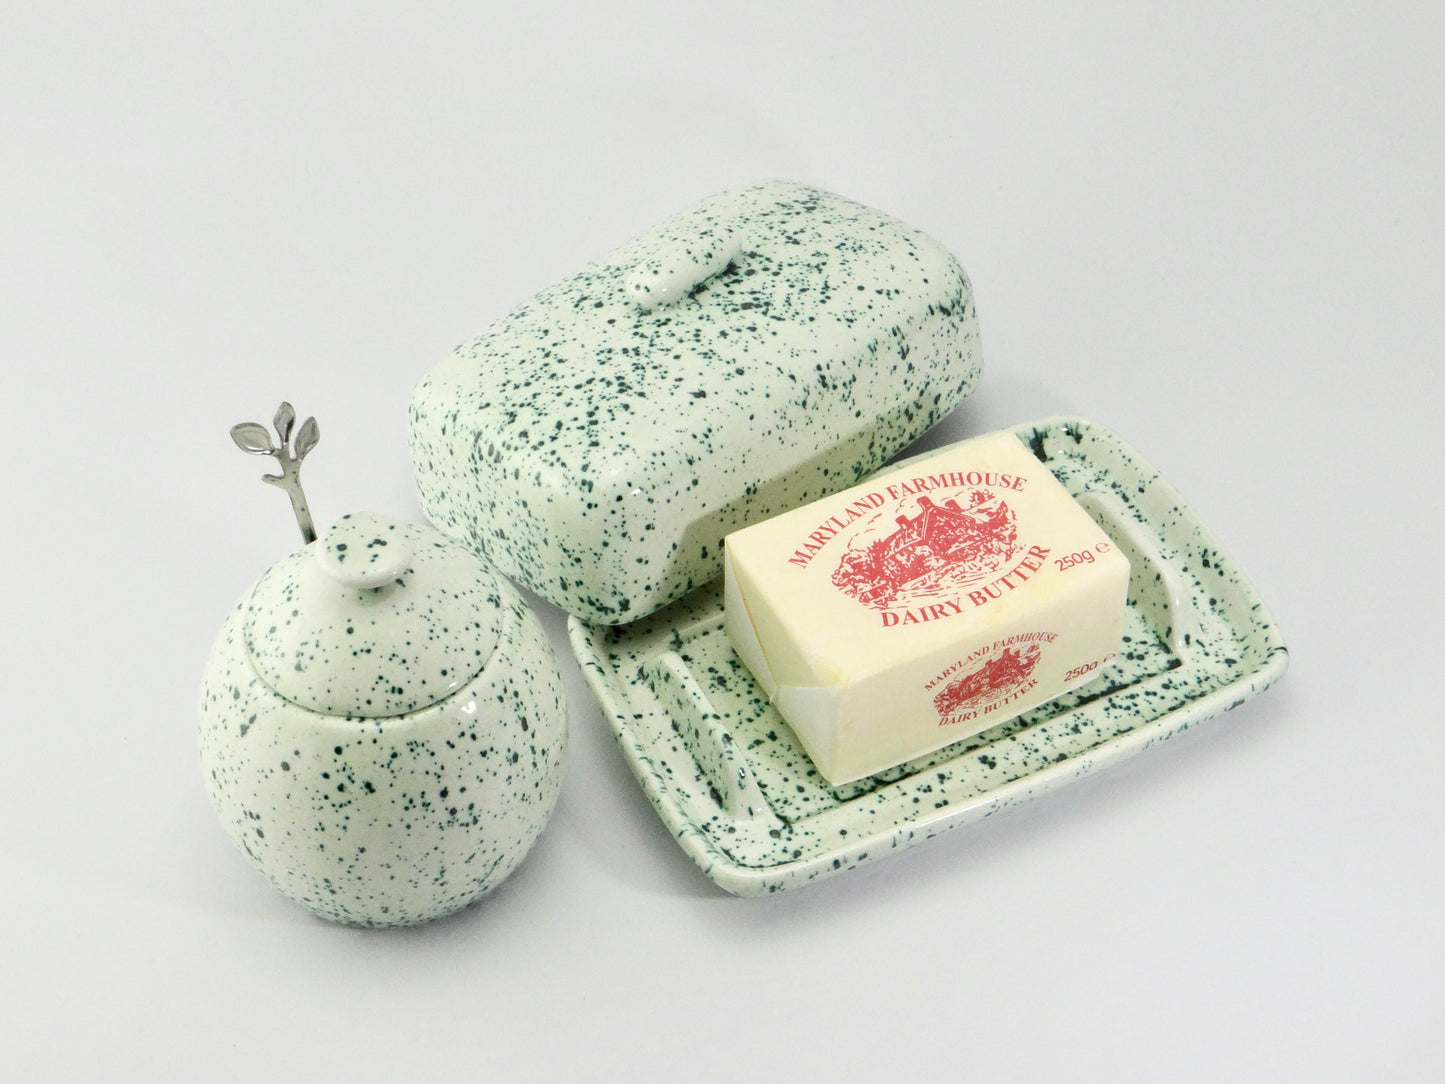 Butter Dish and Sugar Bowl Speckled Green - PeterBowenArt